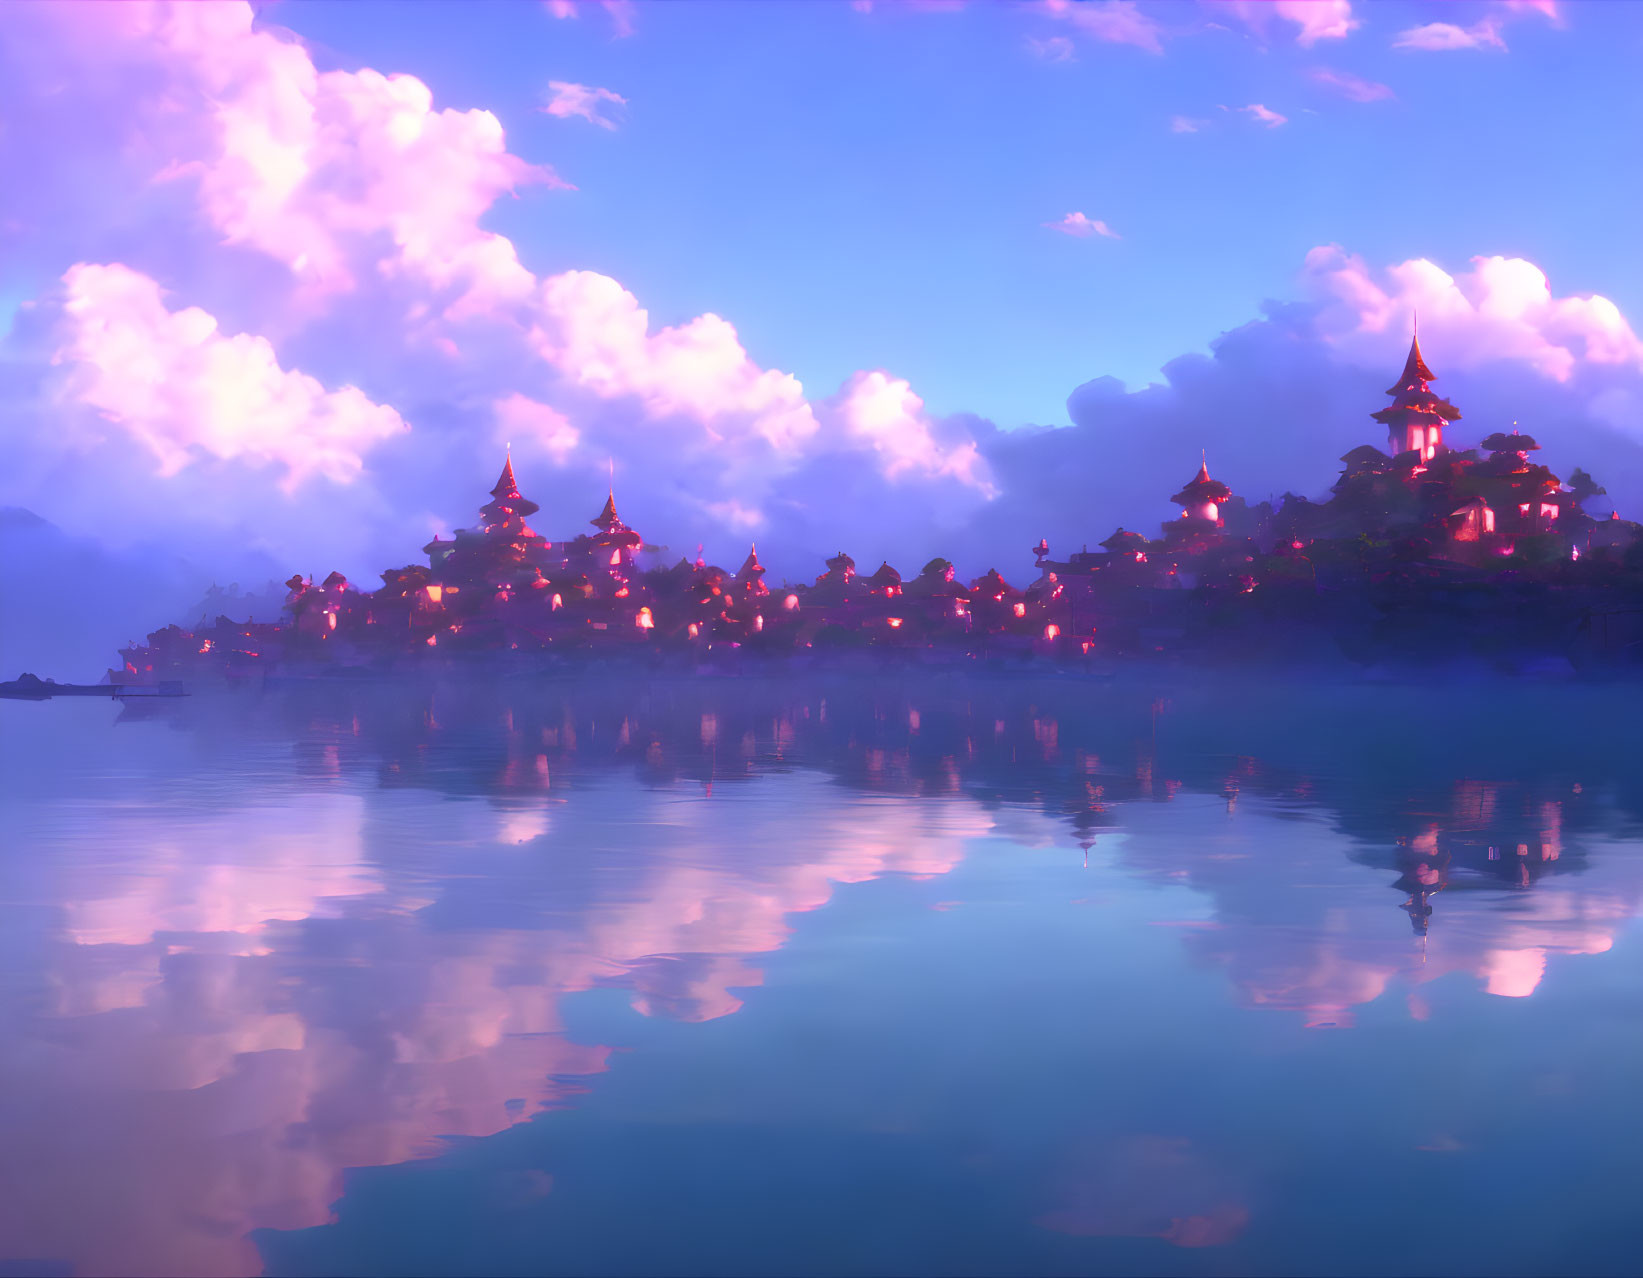 Tranquil fantasy landscape with pagoda-style buildings, warm lights, and pastel sky